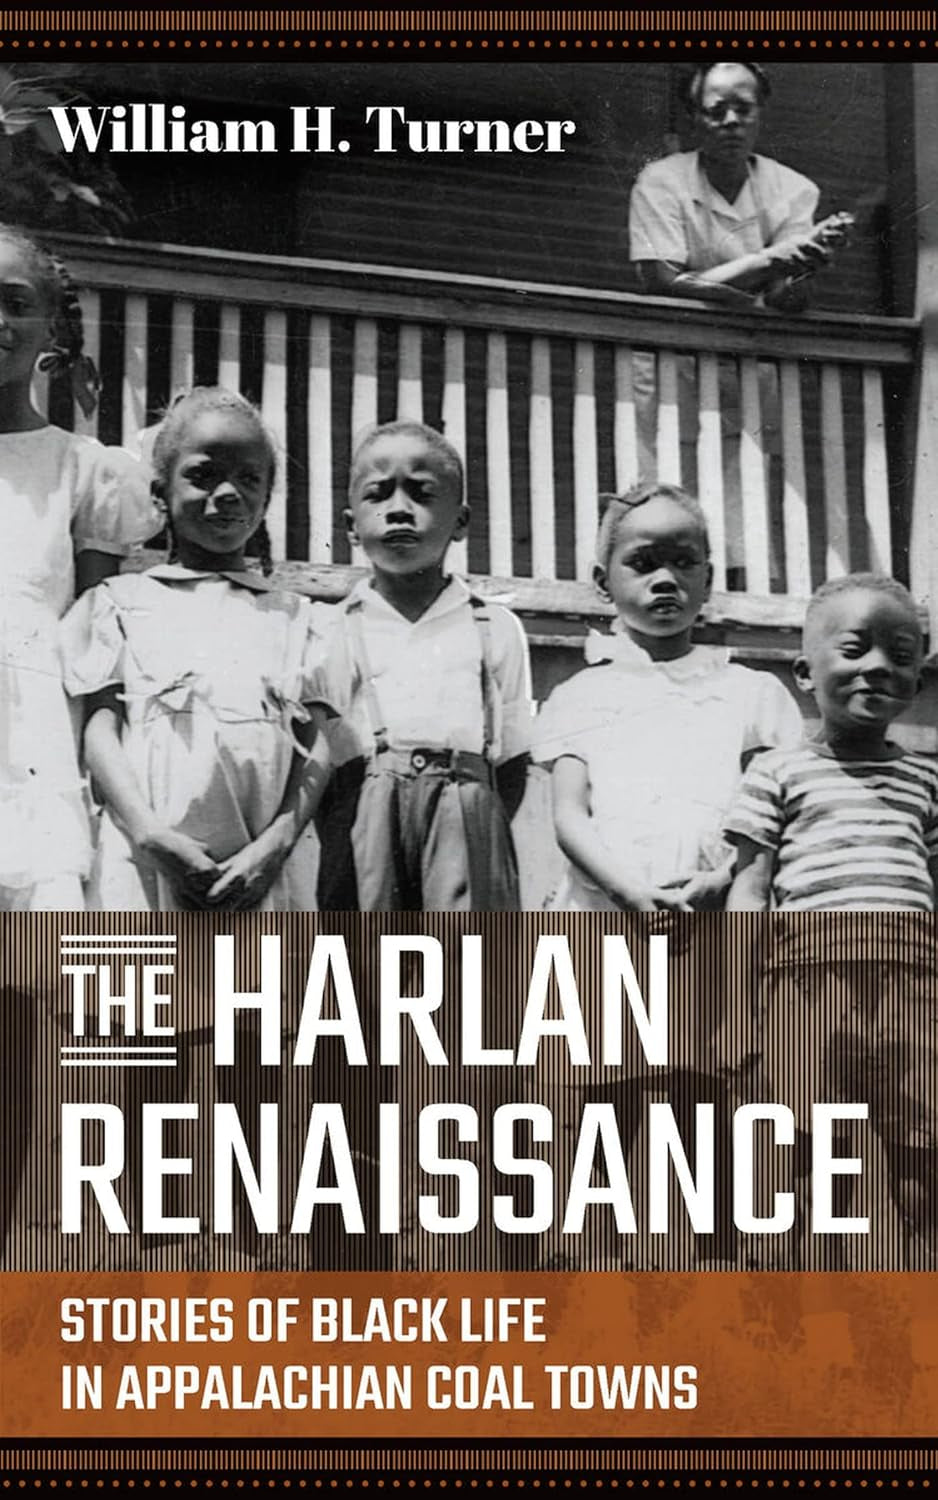 The Harlan Renaissance: Stories of Black Life in Appalachian Coal Towns